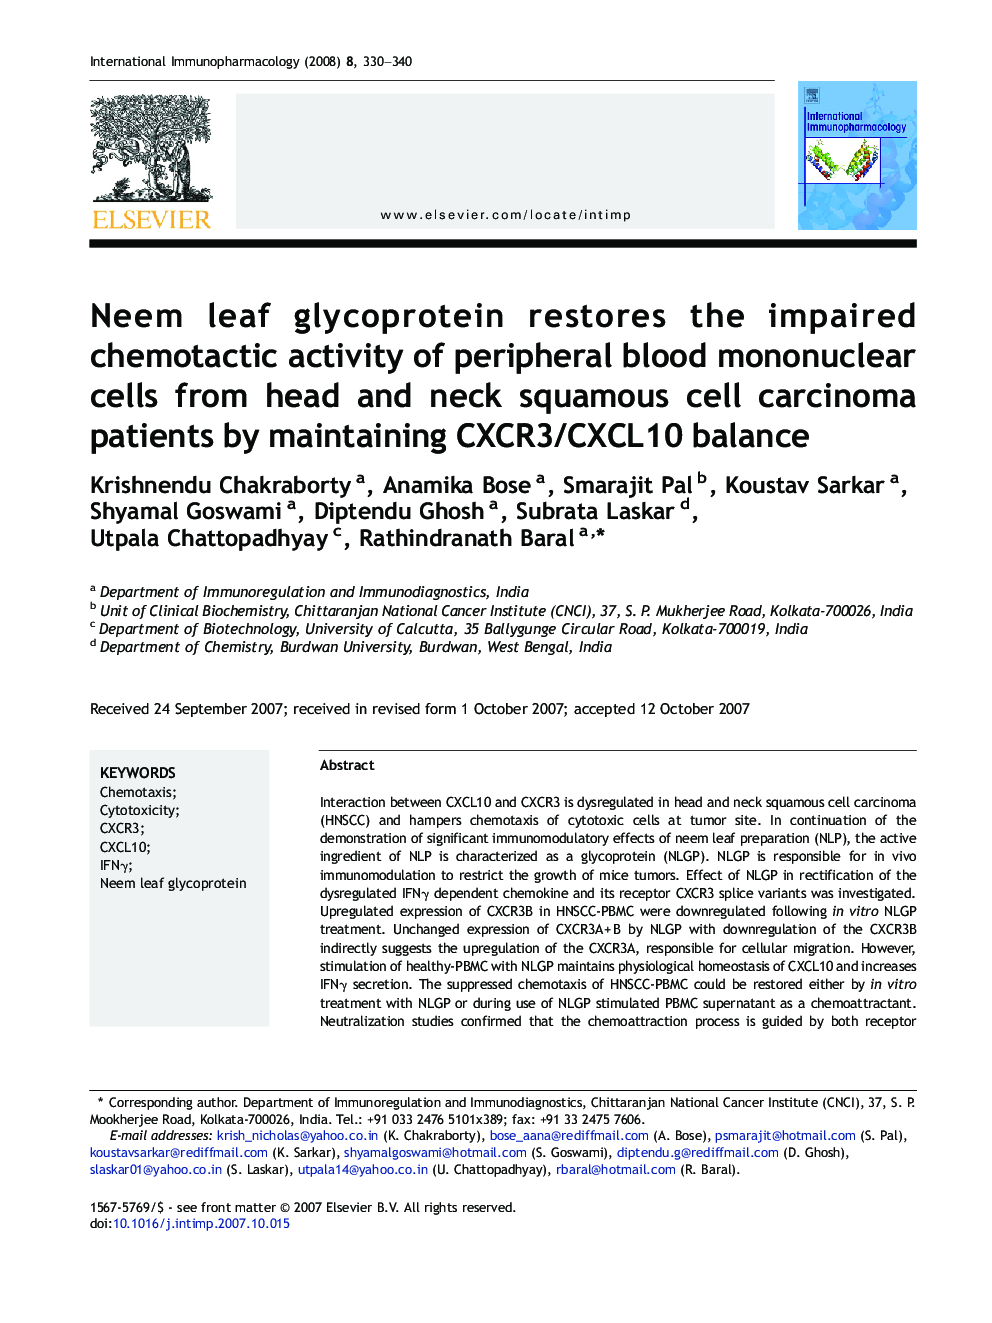 Neem leaf glycoprotein restores the impaired chemotactic activity of peripheral blood mononuclear cells from head and neck squamous cell carcinoma patients by maintaining CXCR3/CXCL10 balance